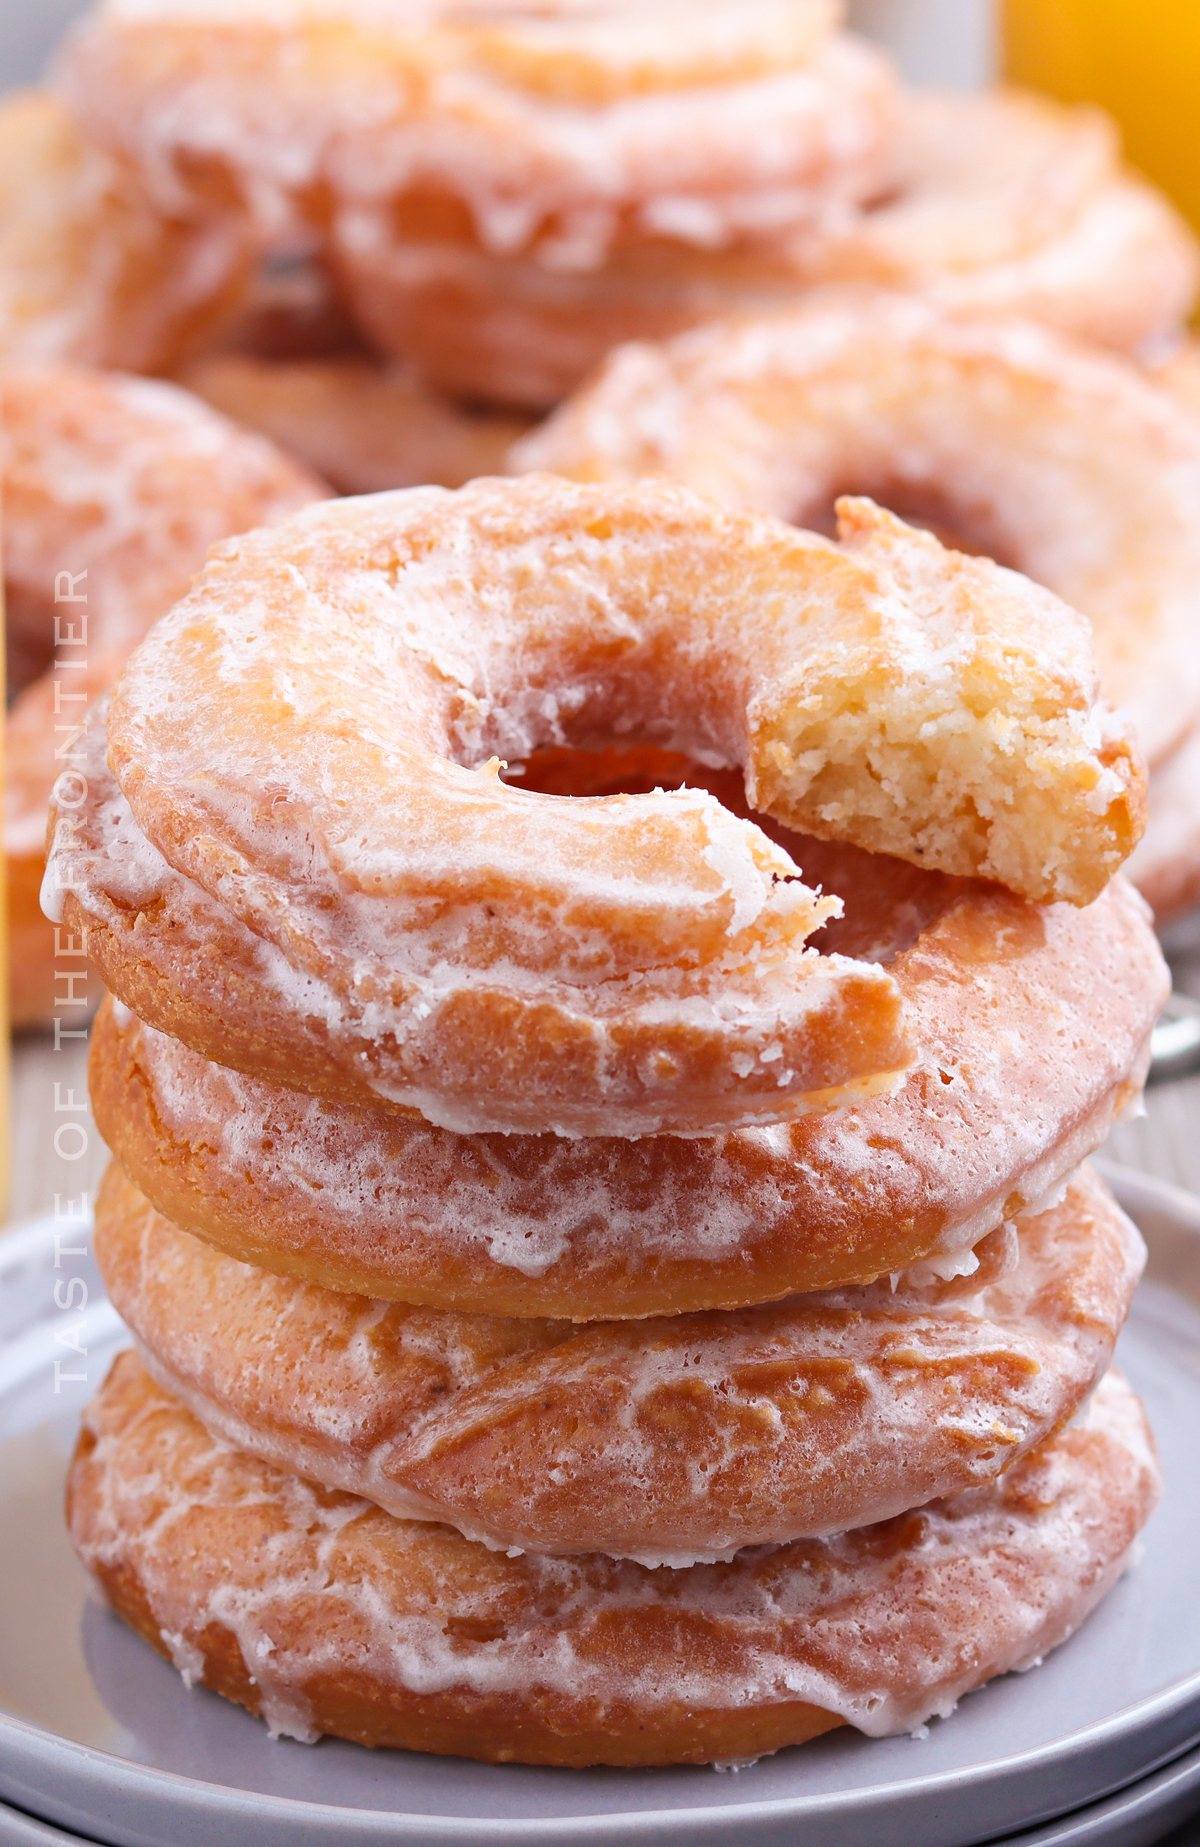 Old Fashioned Sour Cream Donuts